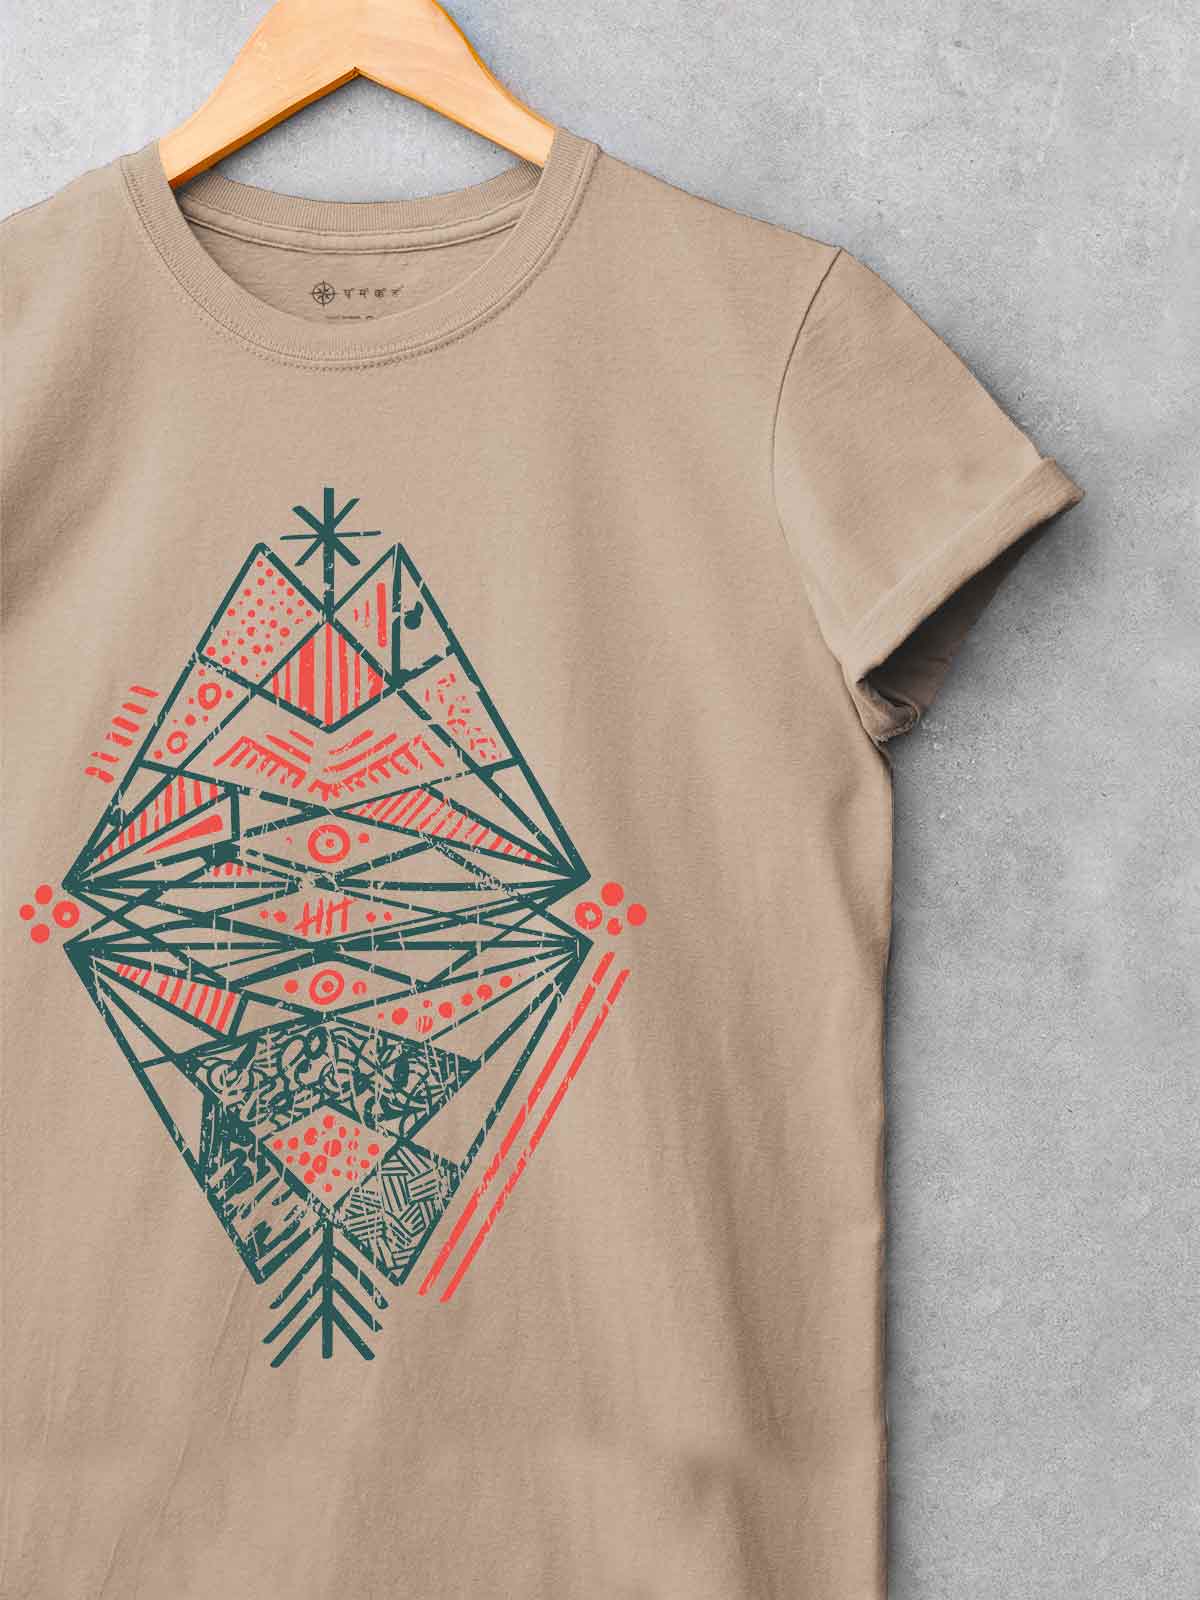 Exotic-tribal-printed-t-shirt-for-men by Ghumakkad